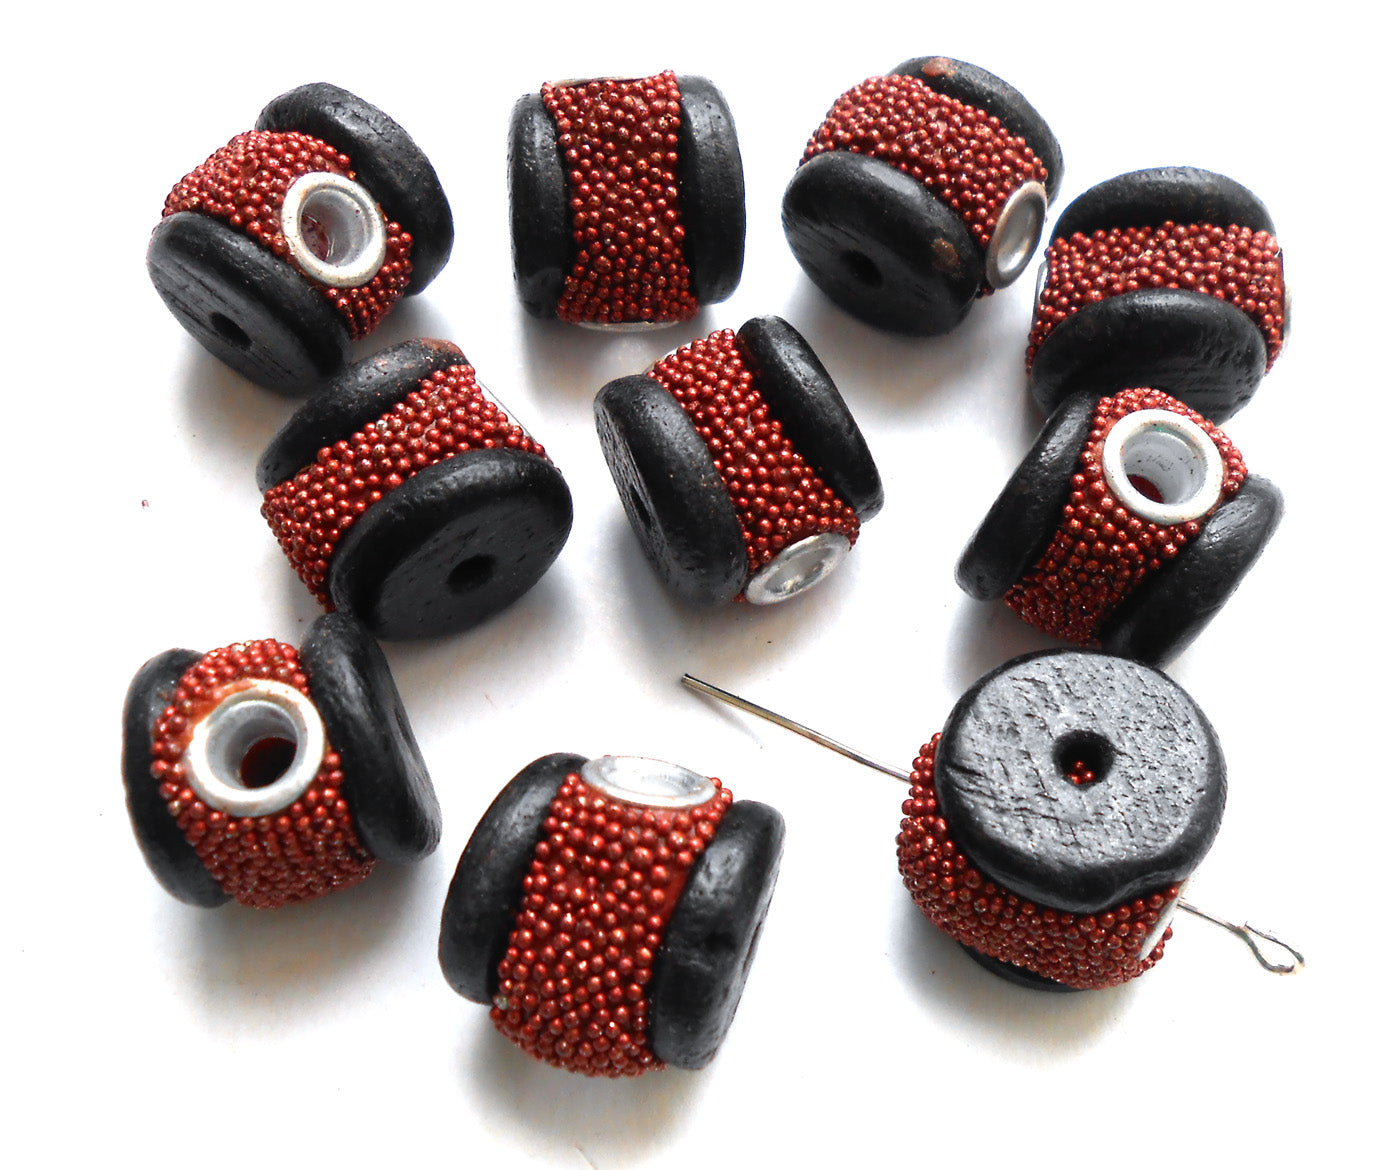 black-red-kashmiri-beads-with-wooden-finish-vt-mat-2518